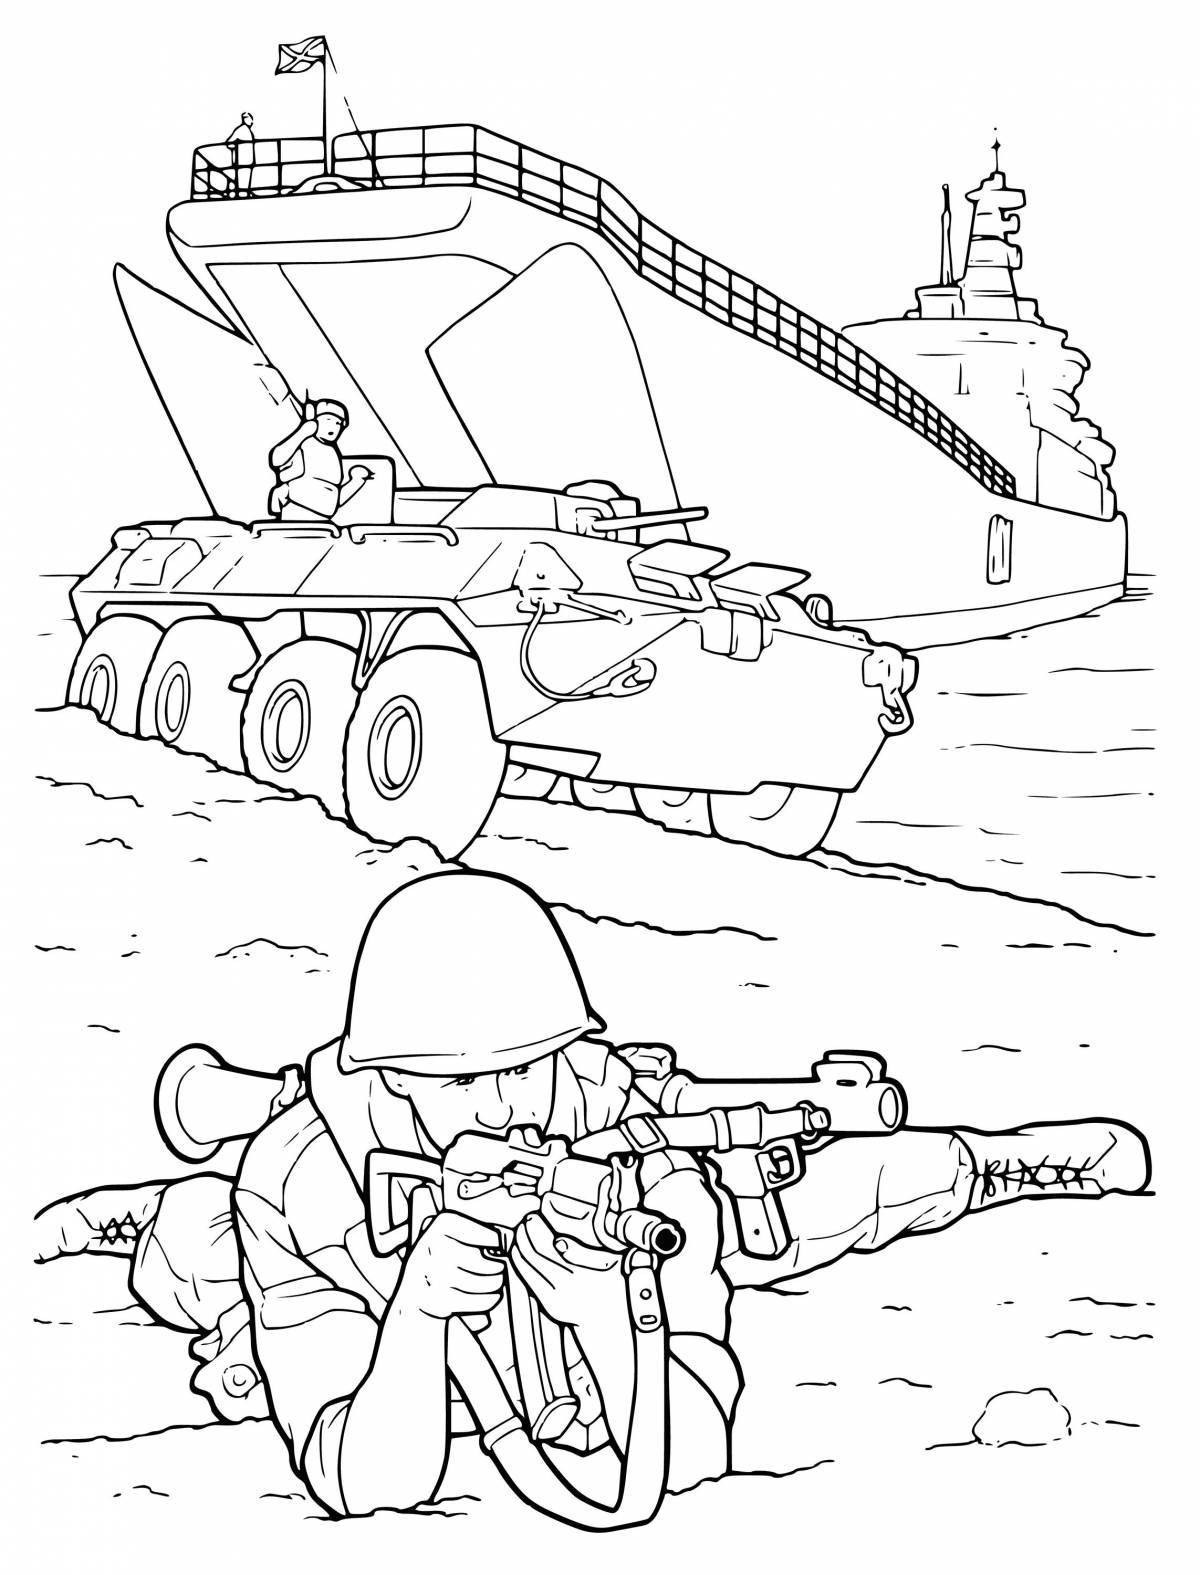 Adorable Russian soldier coloring book for kids